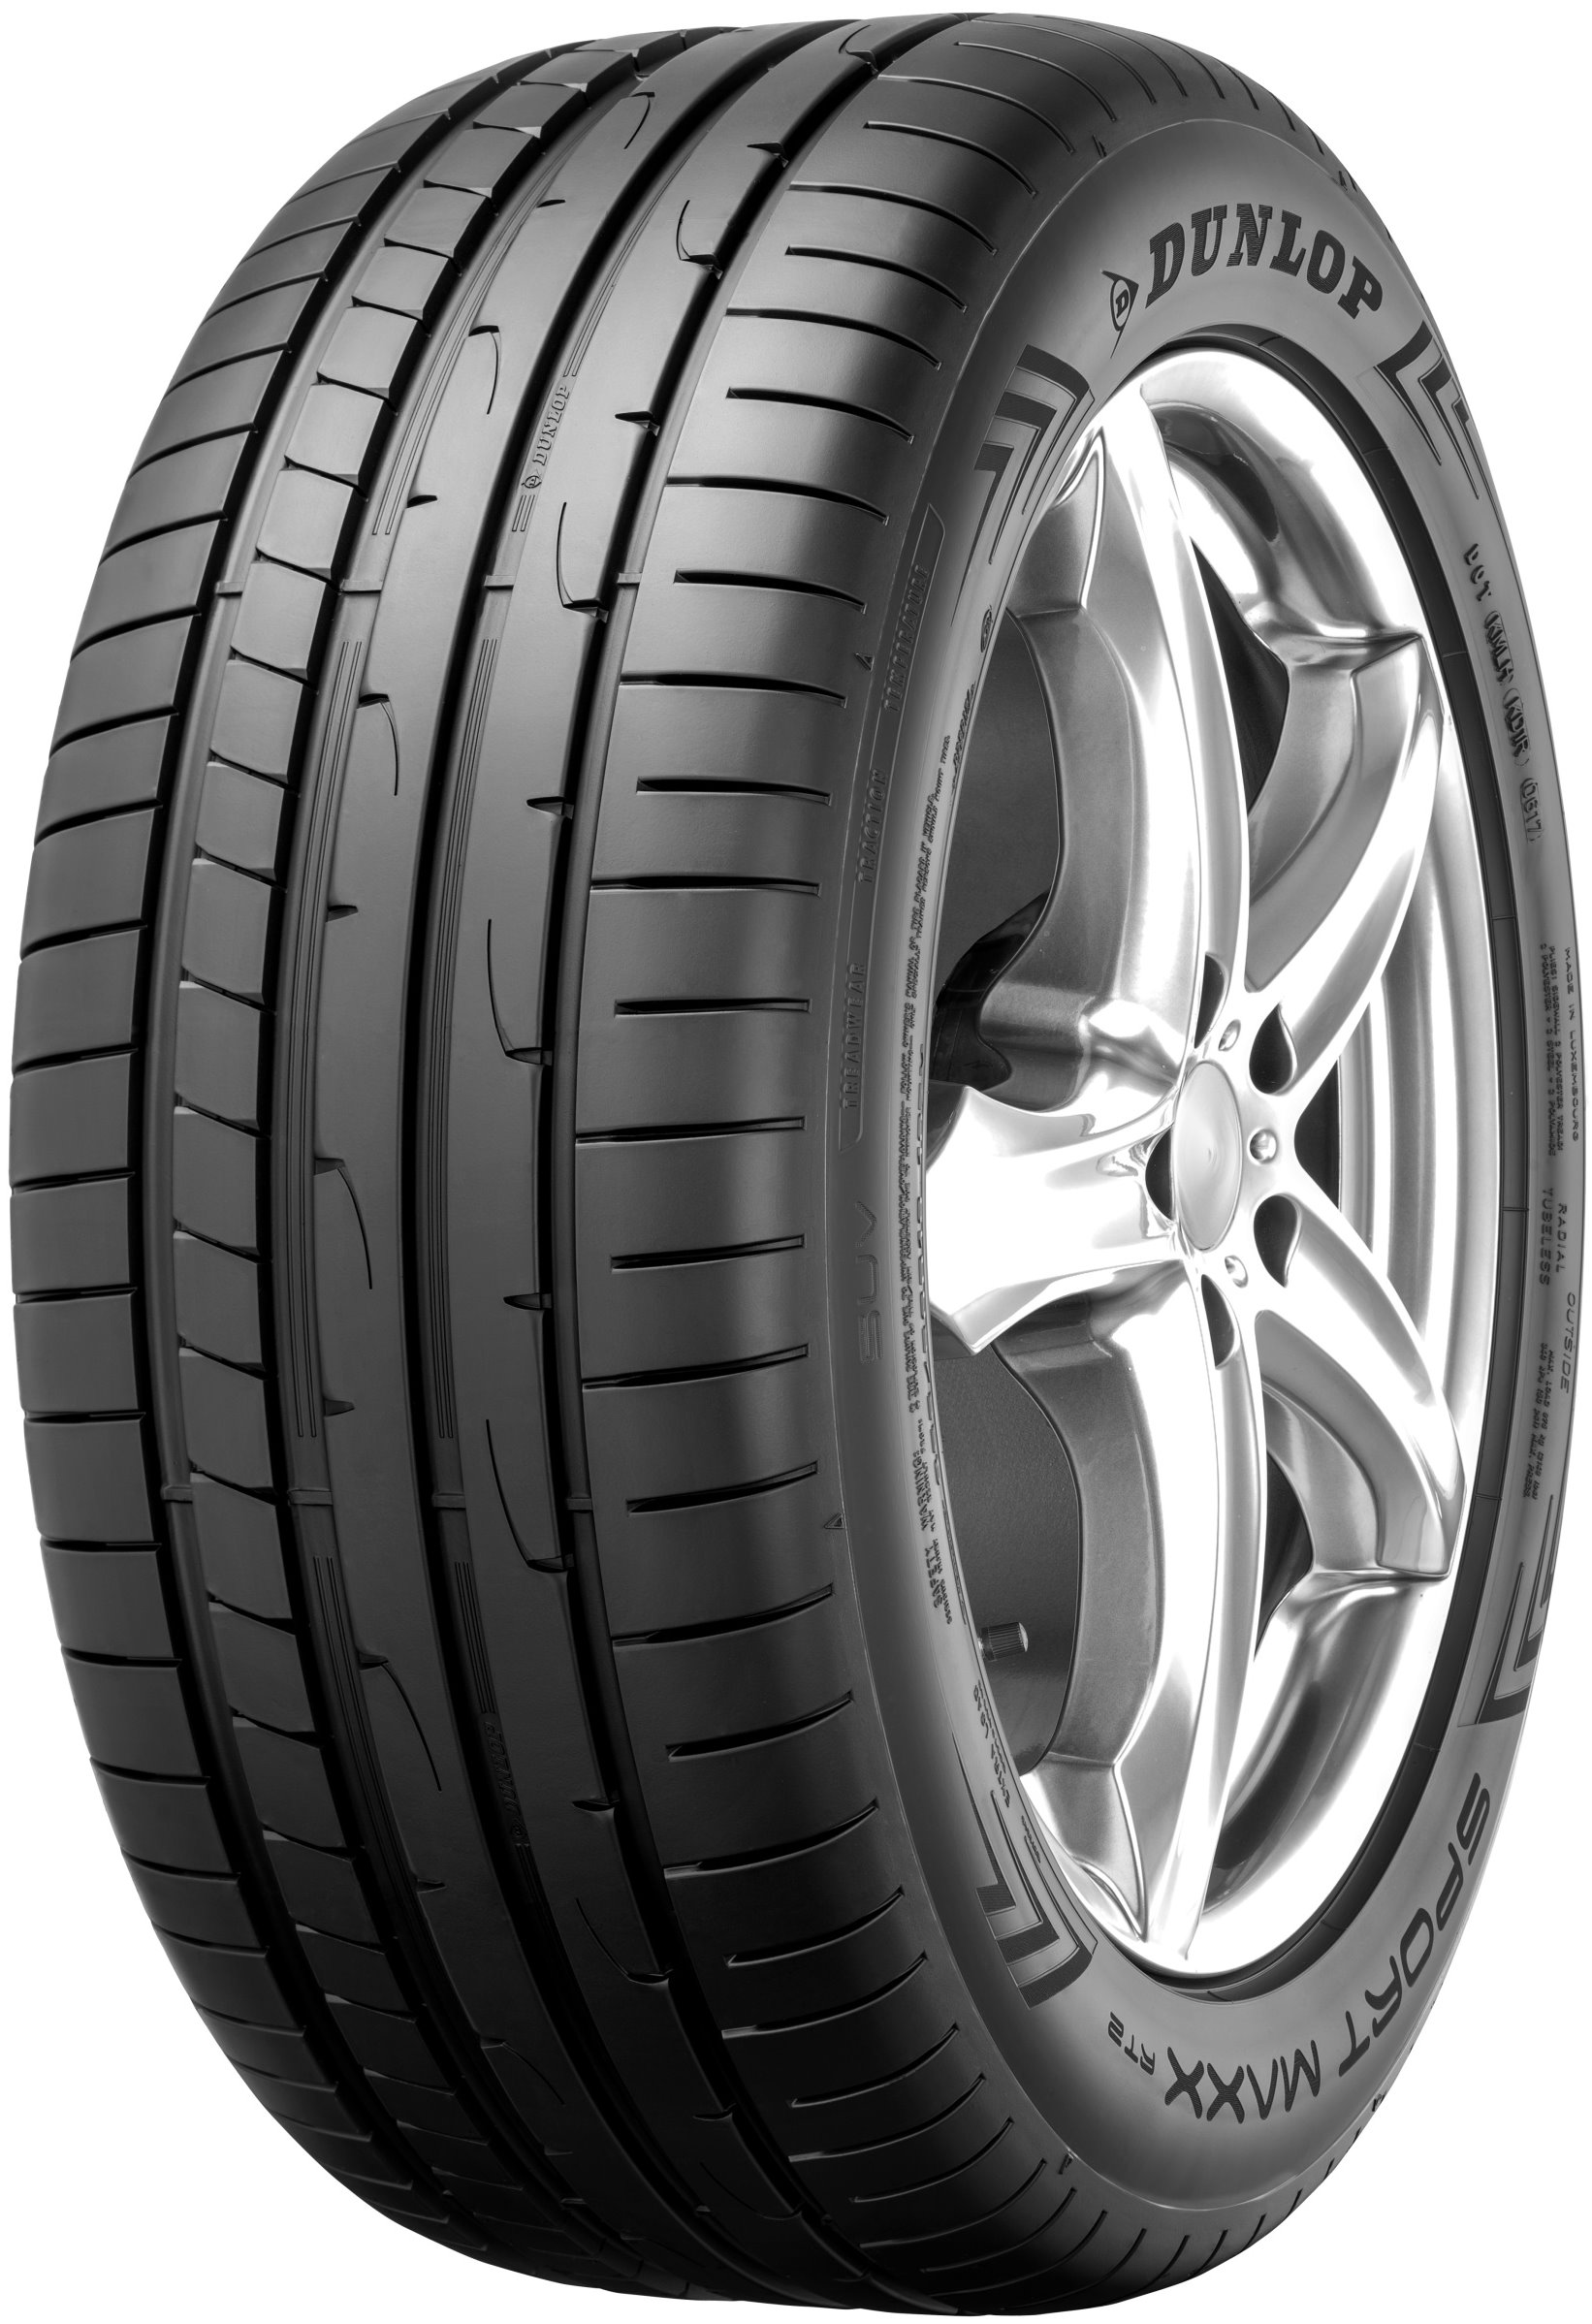 Tests and Dunlop 2 RT SportMaxx Tyre - Reviews